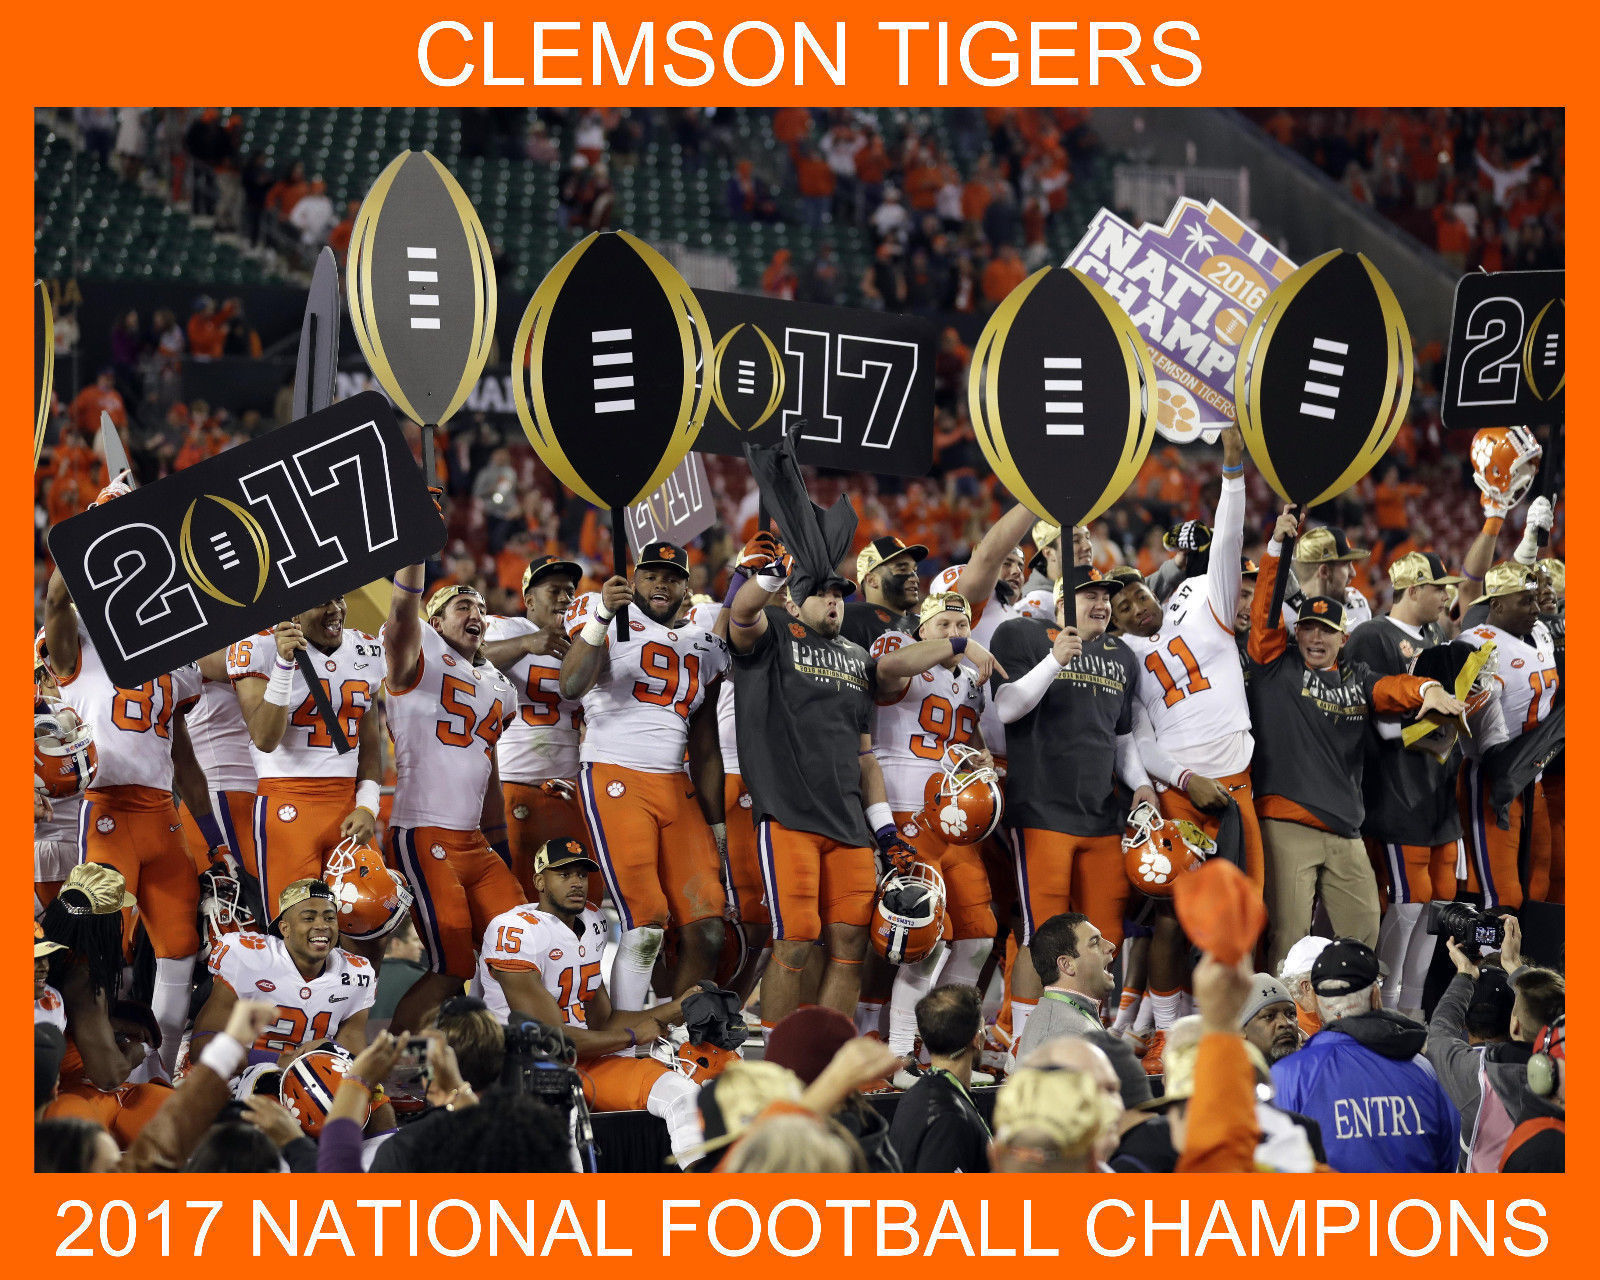 Primary image for 2017 CLEMSON TIGERS 8X10 PHOTO TEAM PICTURE NCAA FOOTBALL CHAMPS